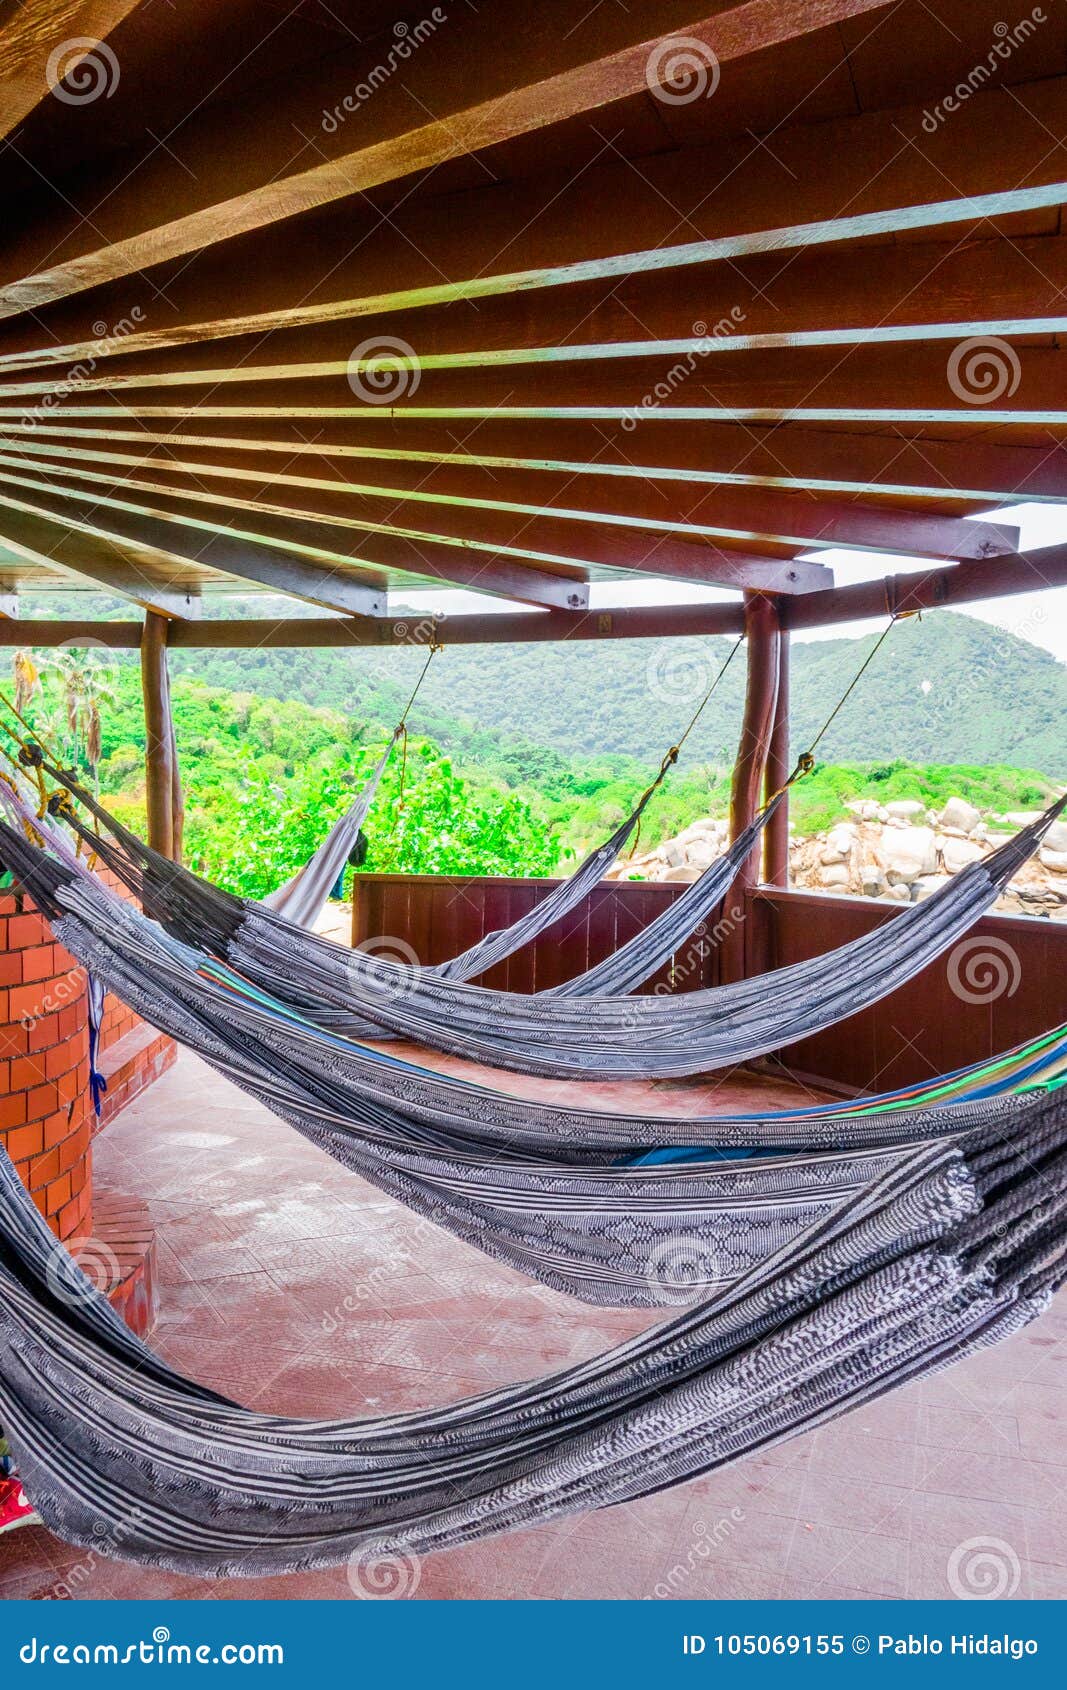 many relaxing hammocks under a bungalow, with a blurred nature background in tairona national park, colombia